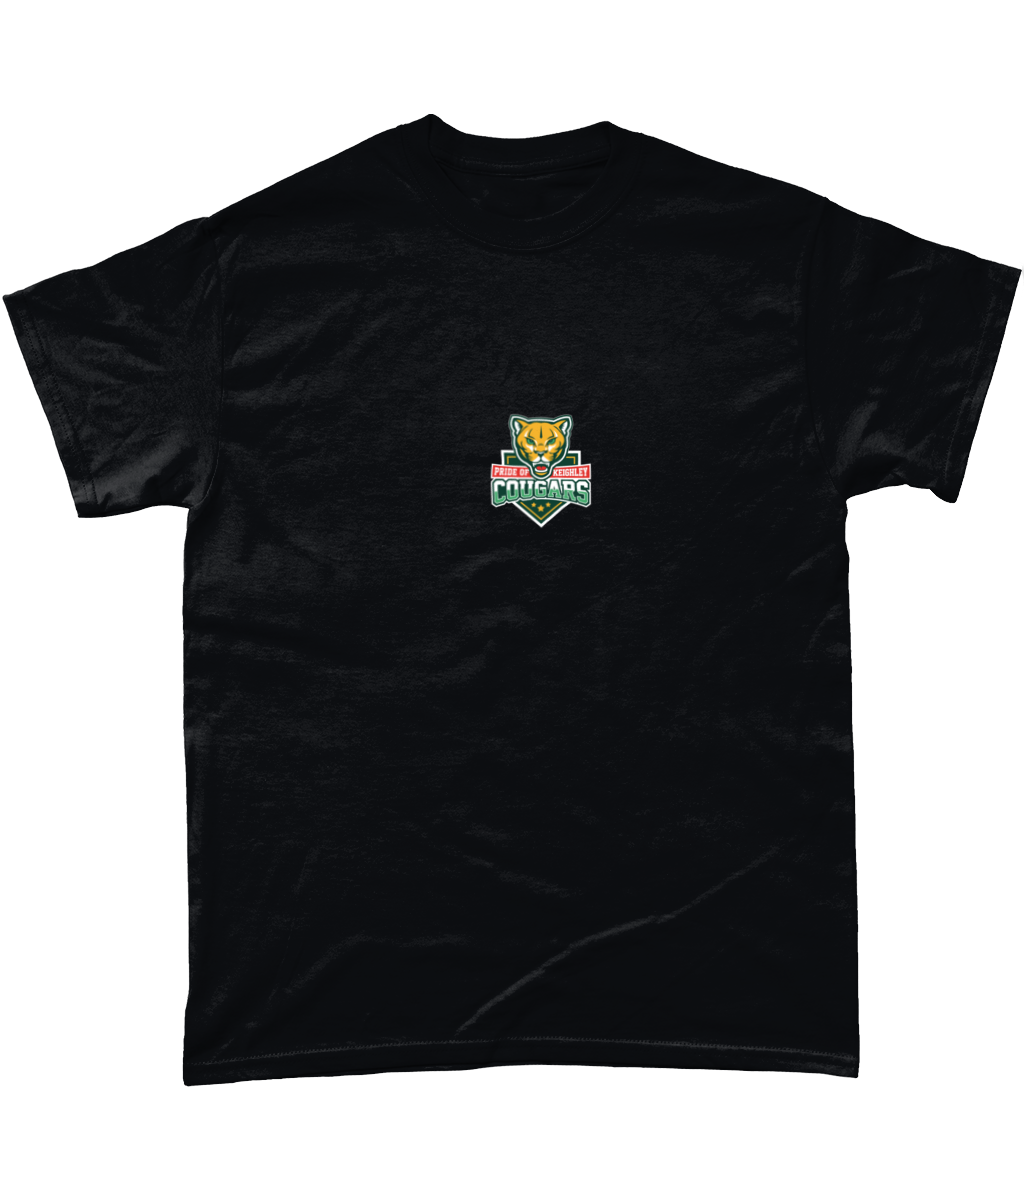 Keighley Cougars Work Hard & Trust The Process T-Shirt Black